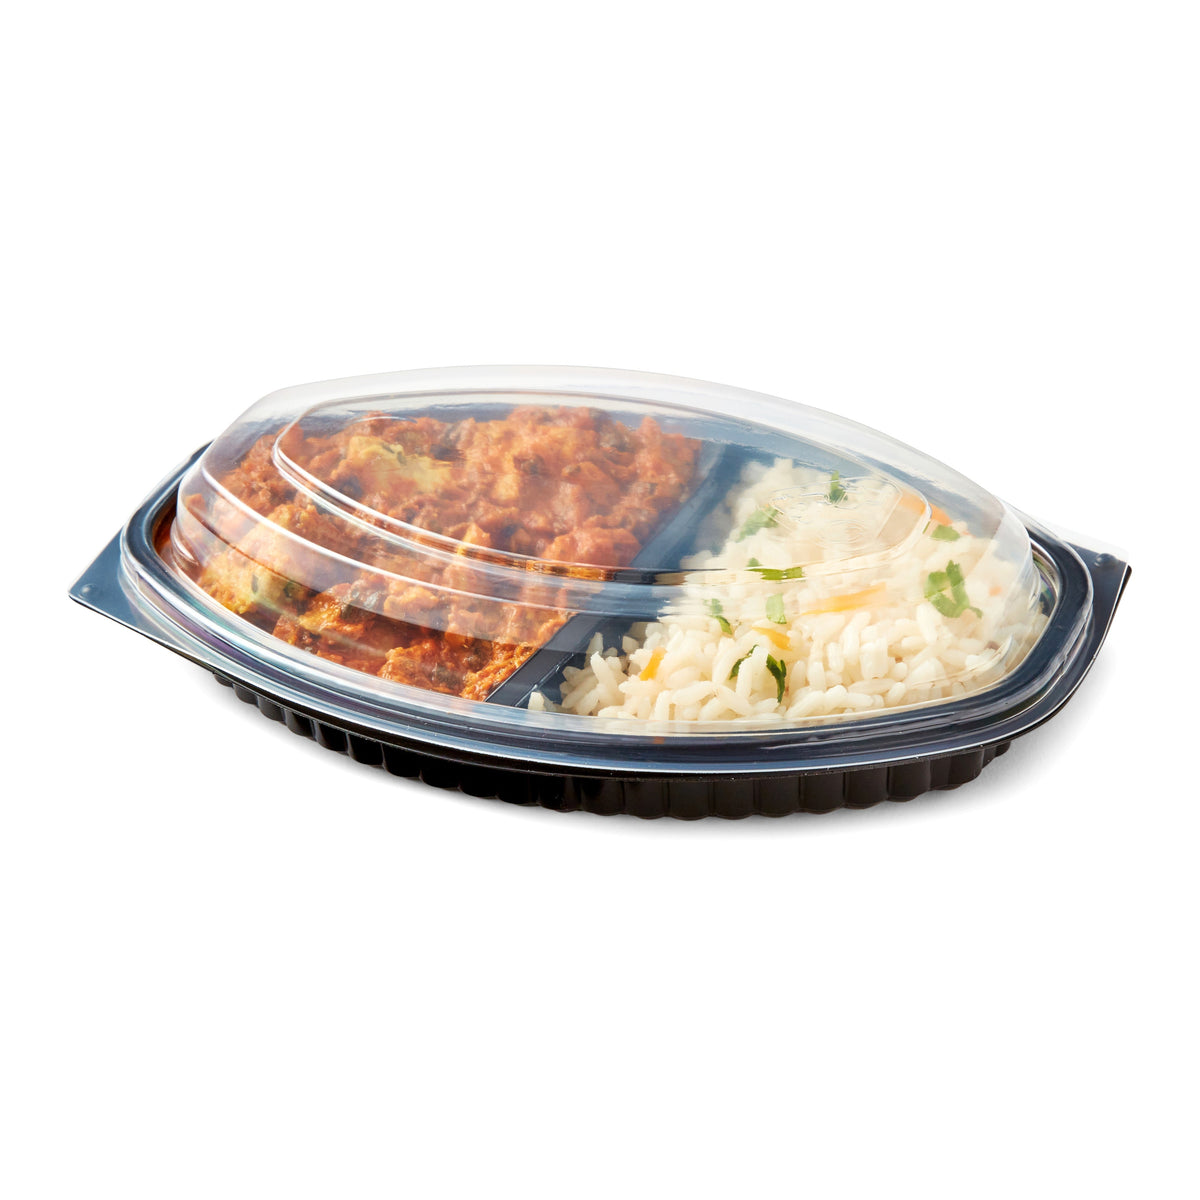 20 x 560 ml (19.8 ounce) Microwavable Twin Hot Food Meal Prep Trays & Lids (207mm x 143mm x 59mm)